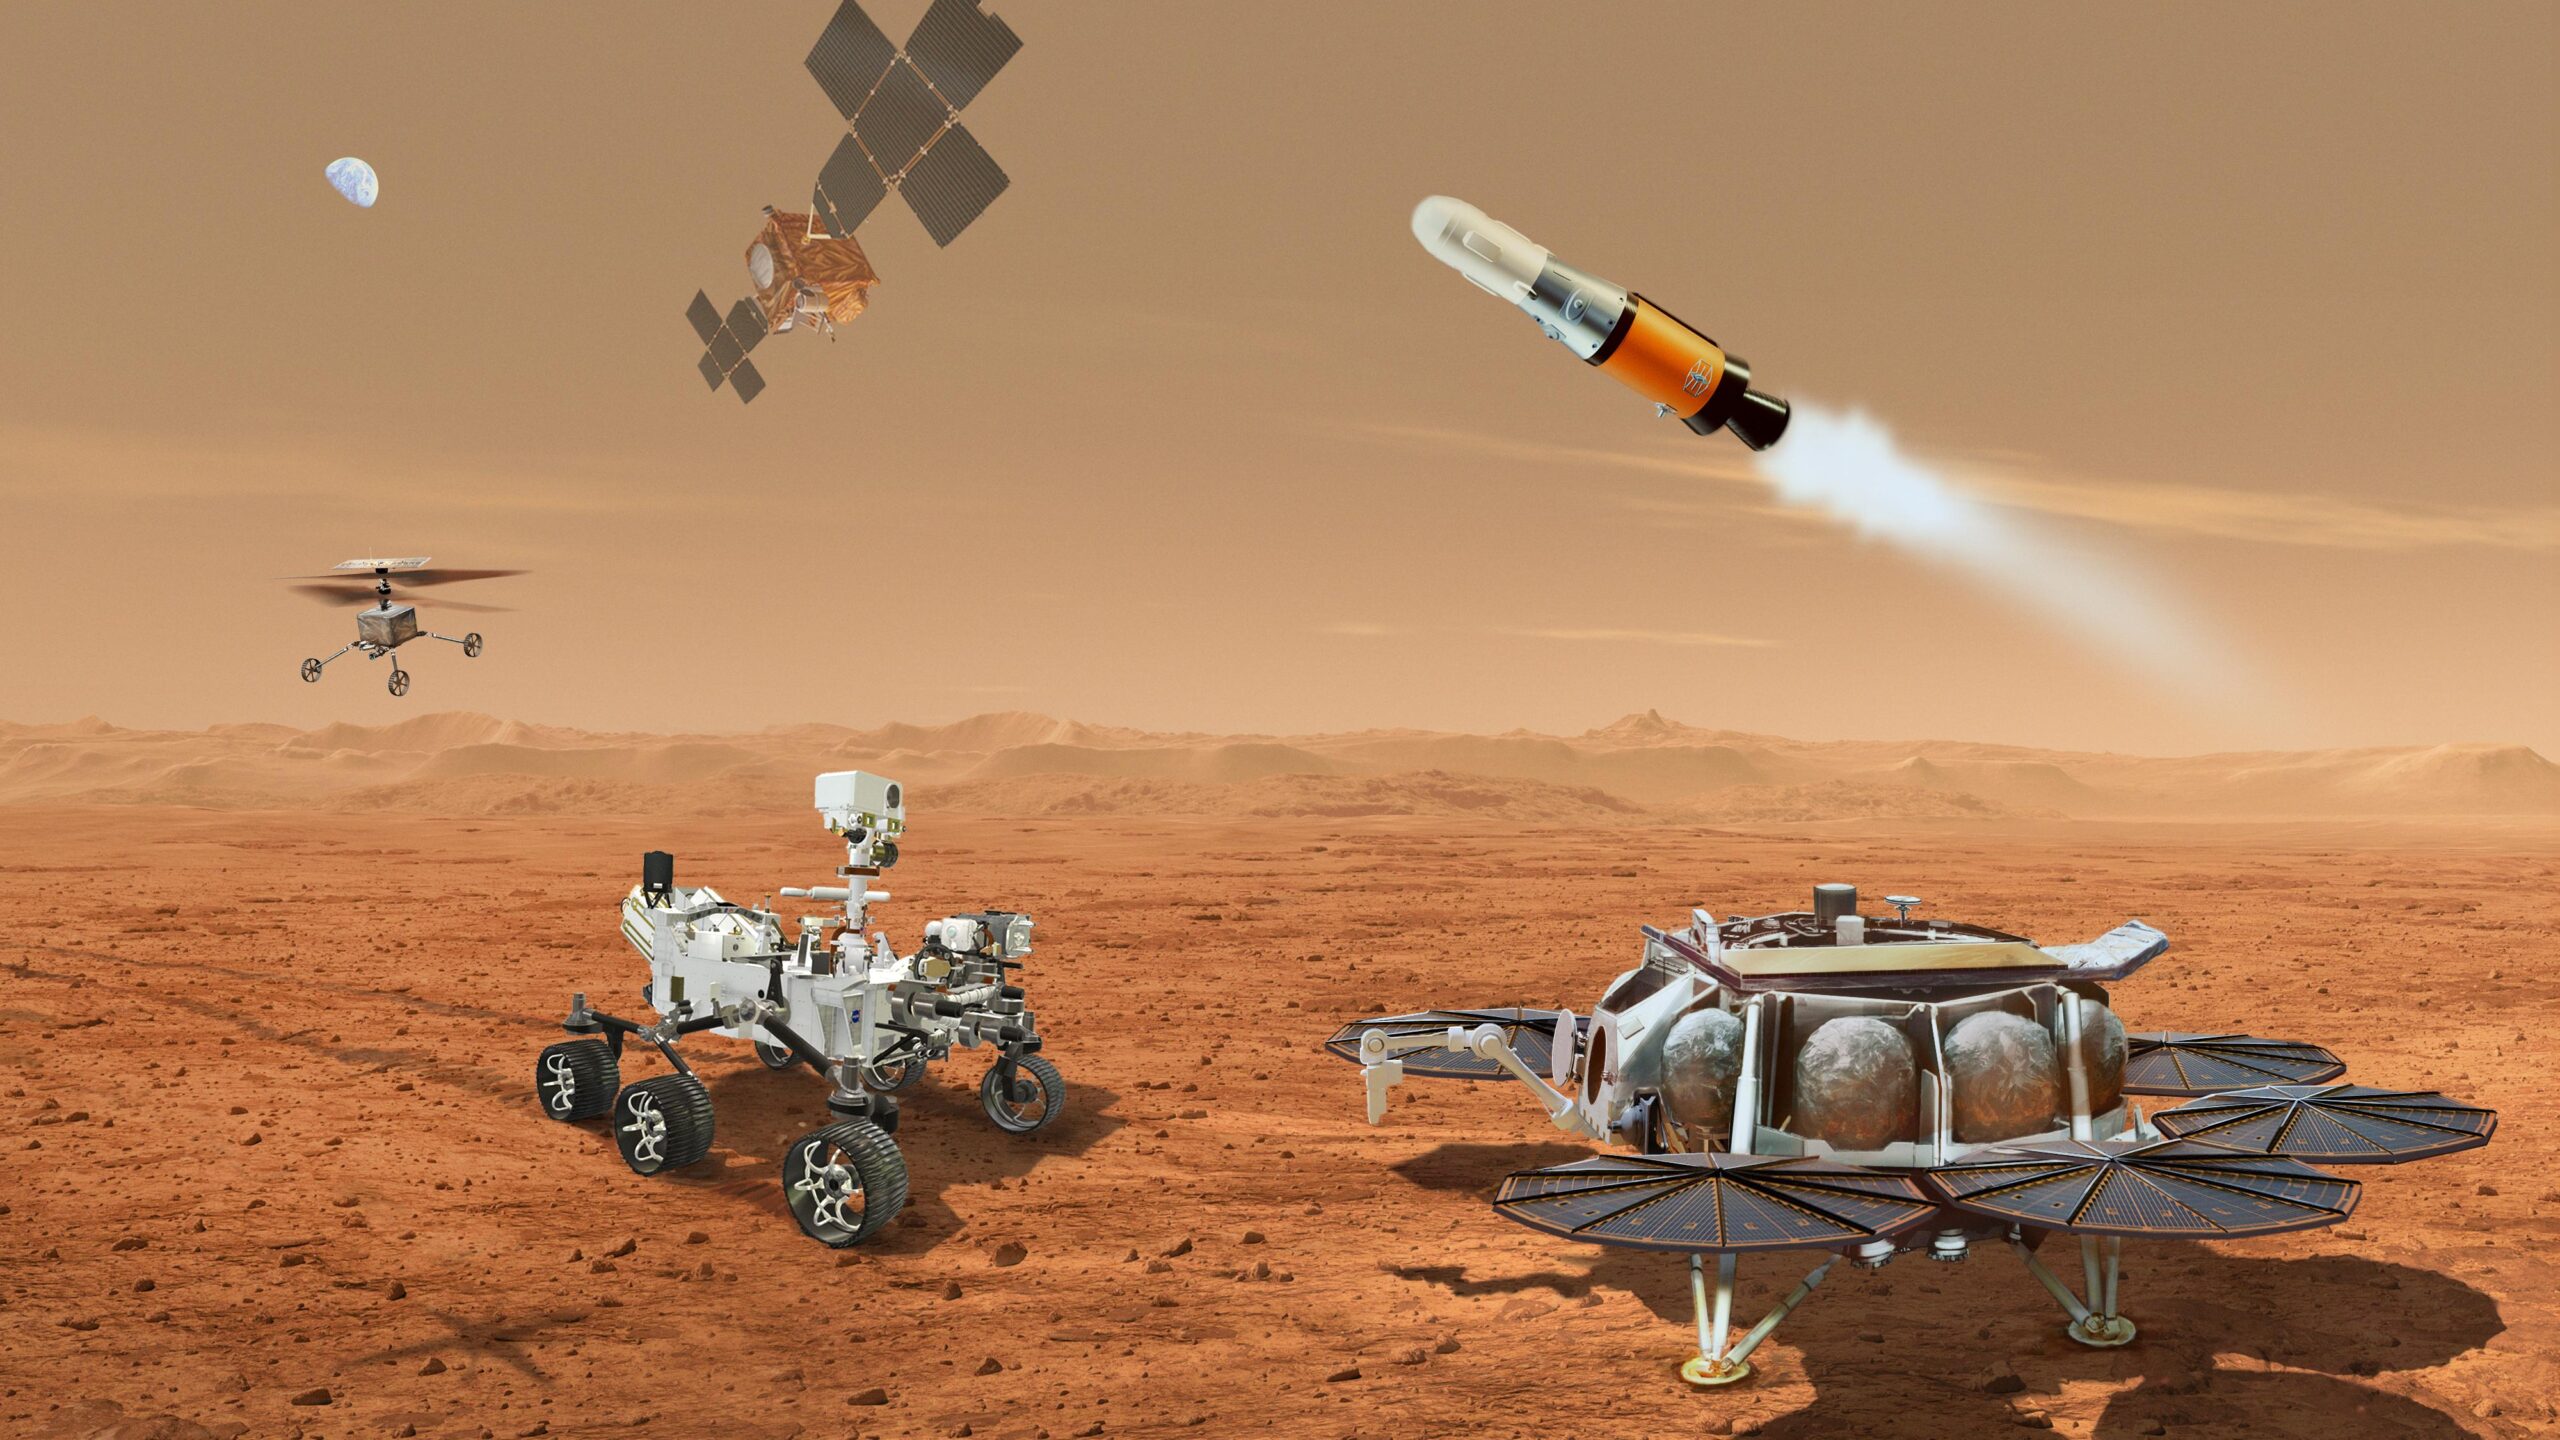 Multiple vehicles will be required to collect rock samples from Mars.